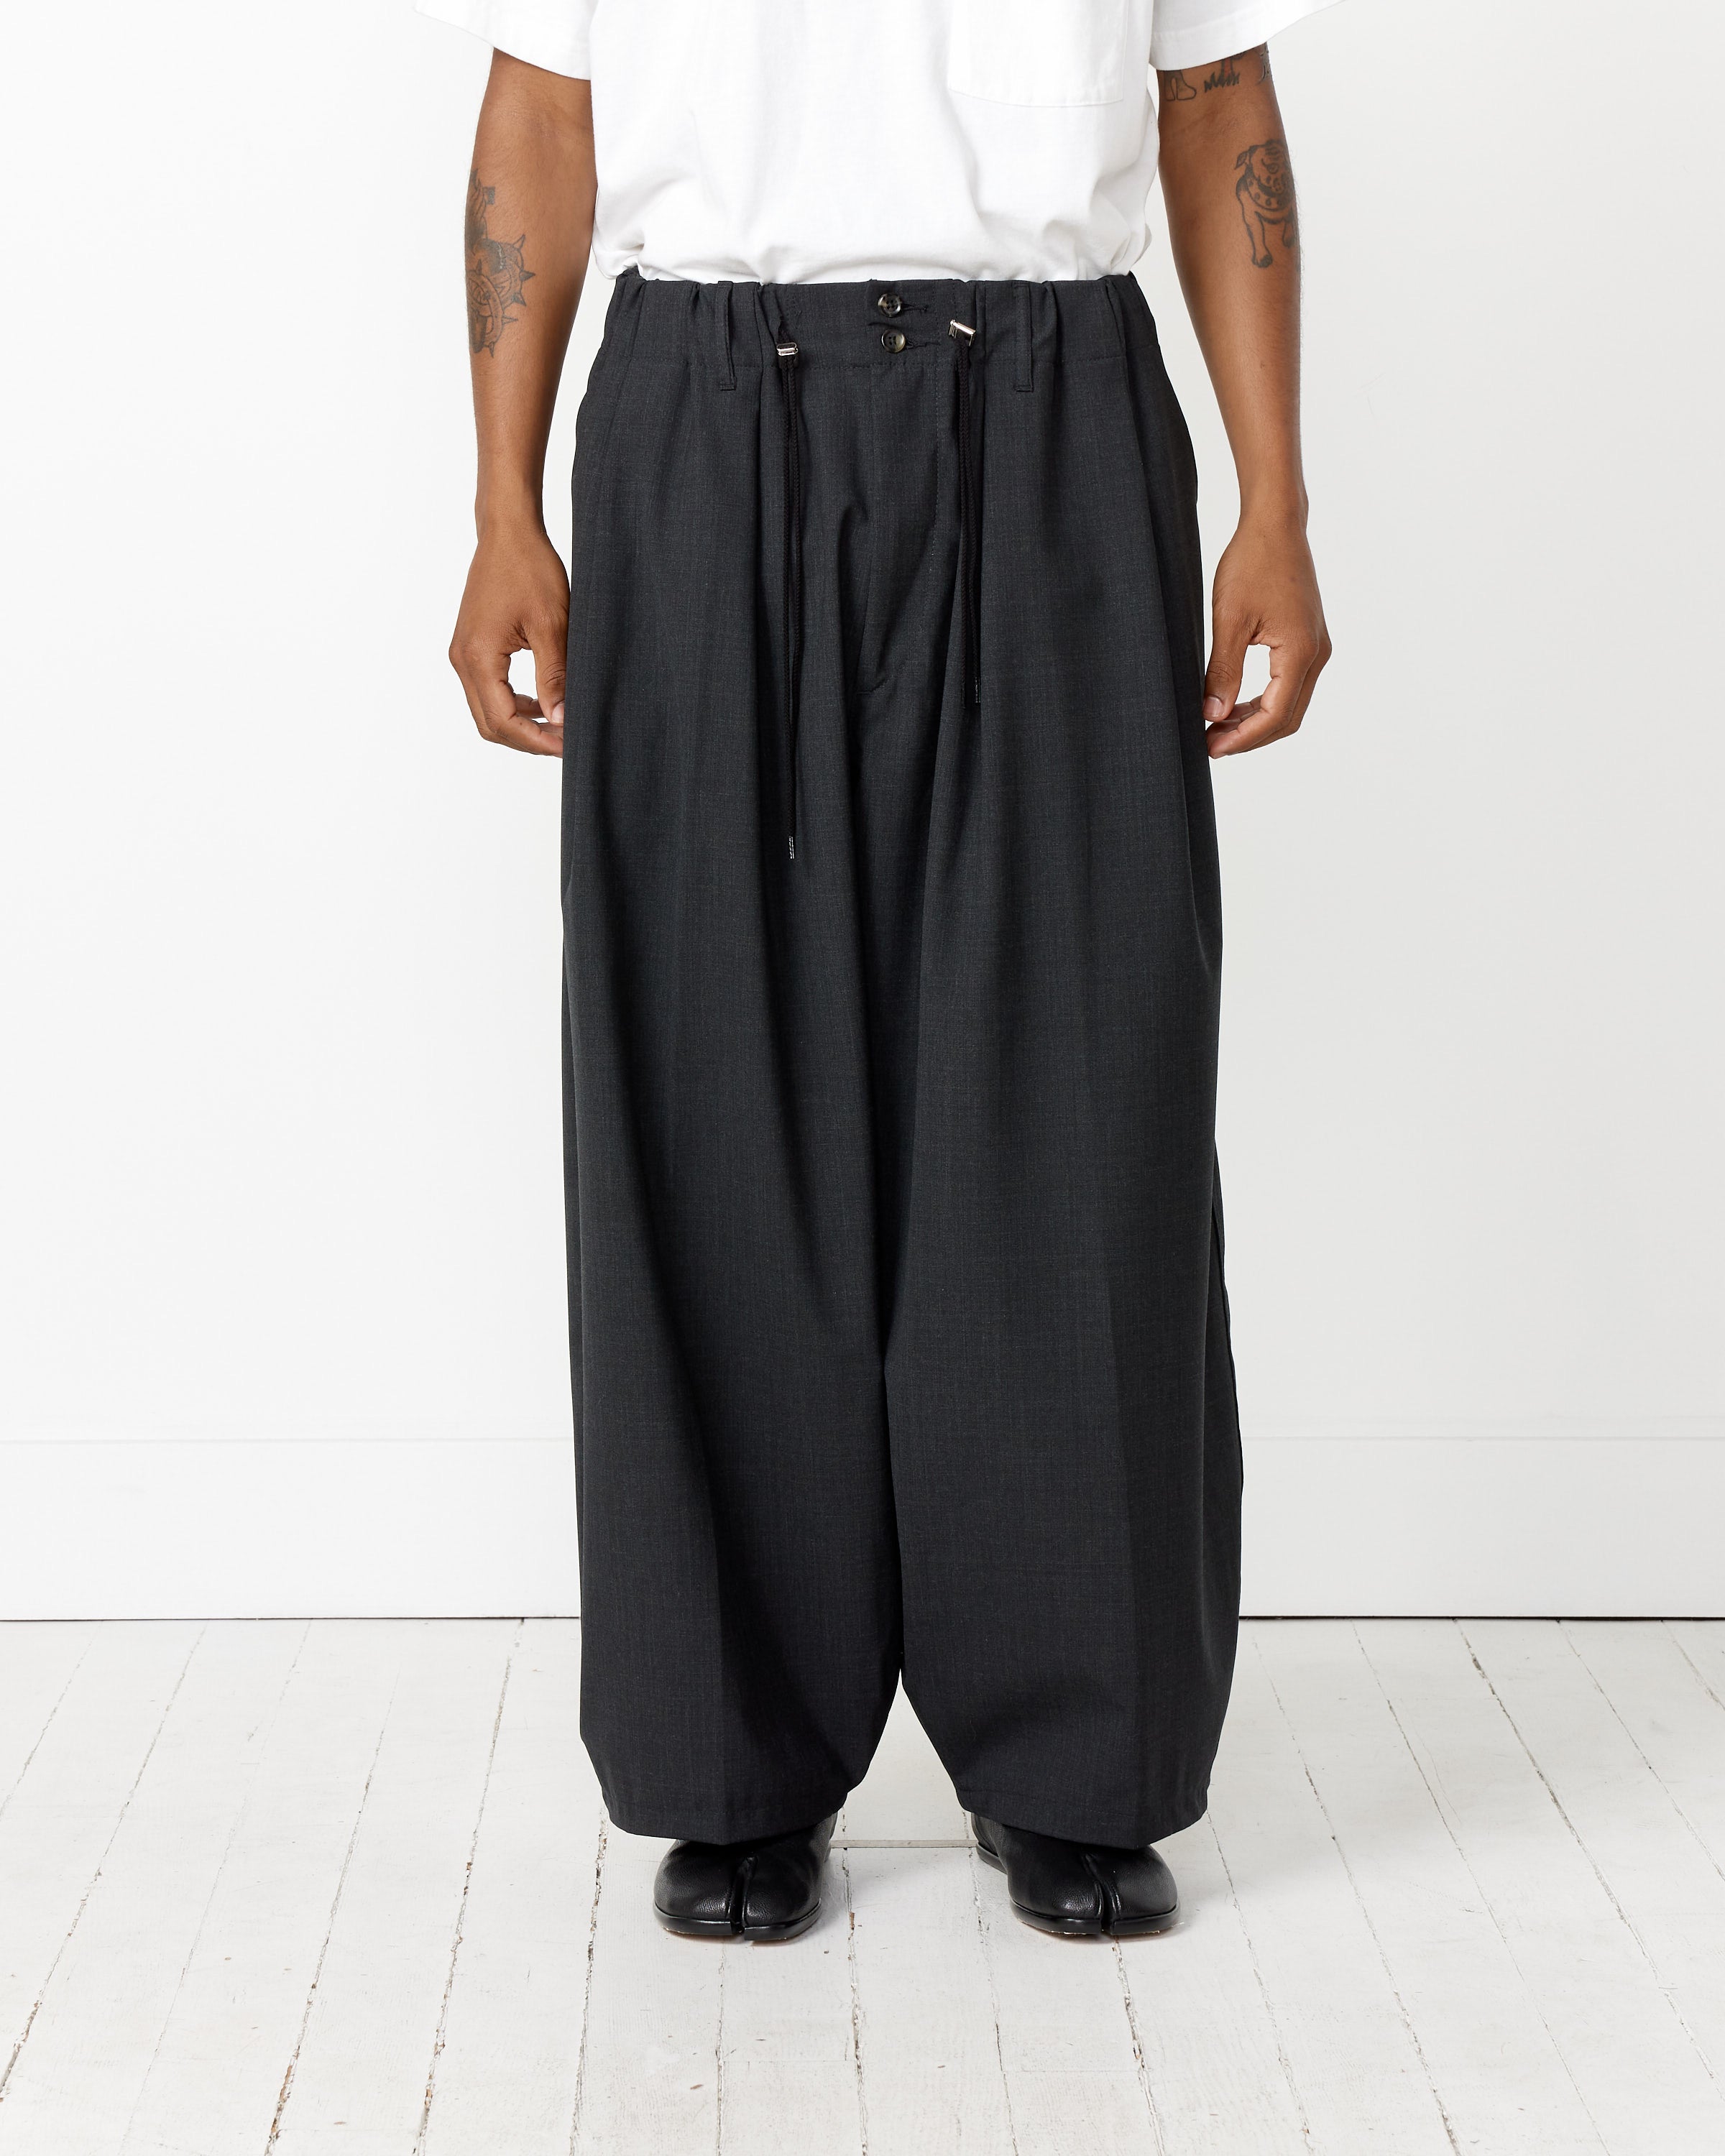 Mohawk General Store | Sillage | Essential Circular Pants in